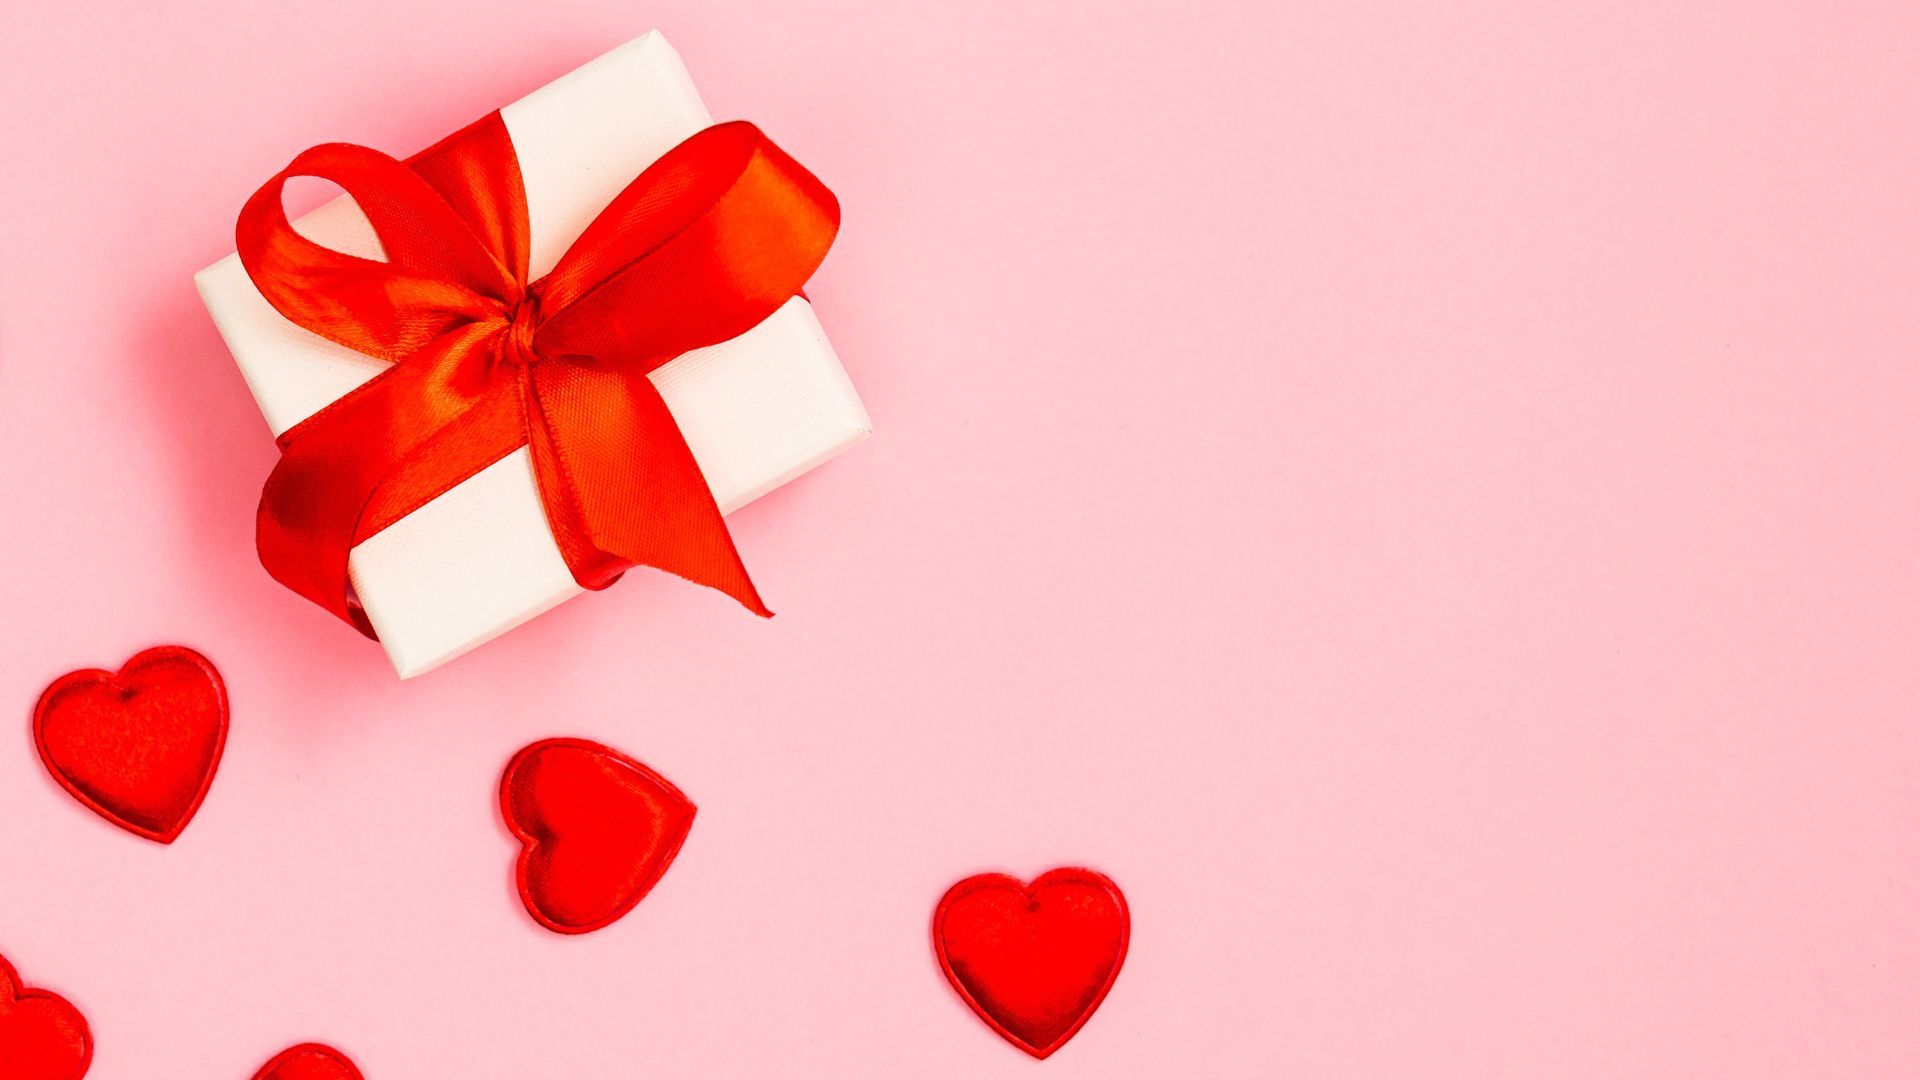 What should I gift my girlfriend on new year's eve? - Quora